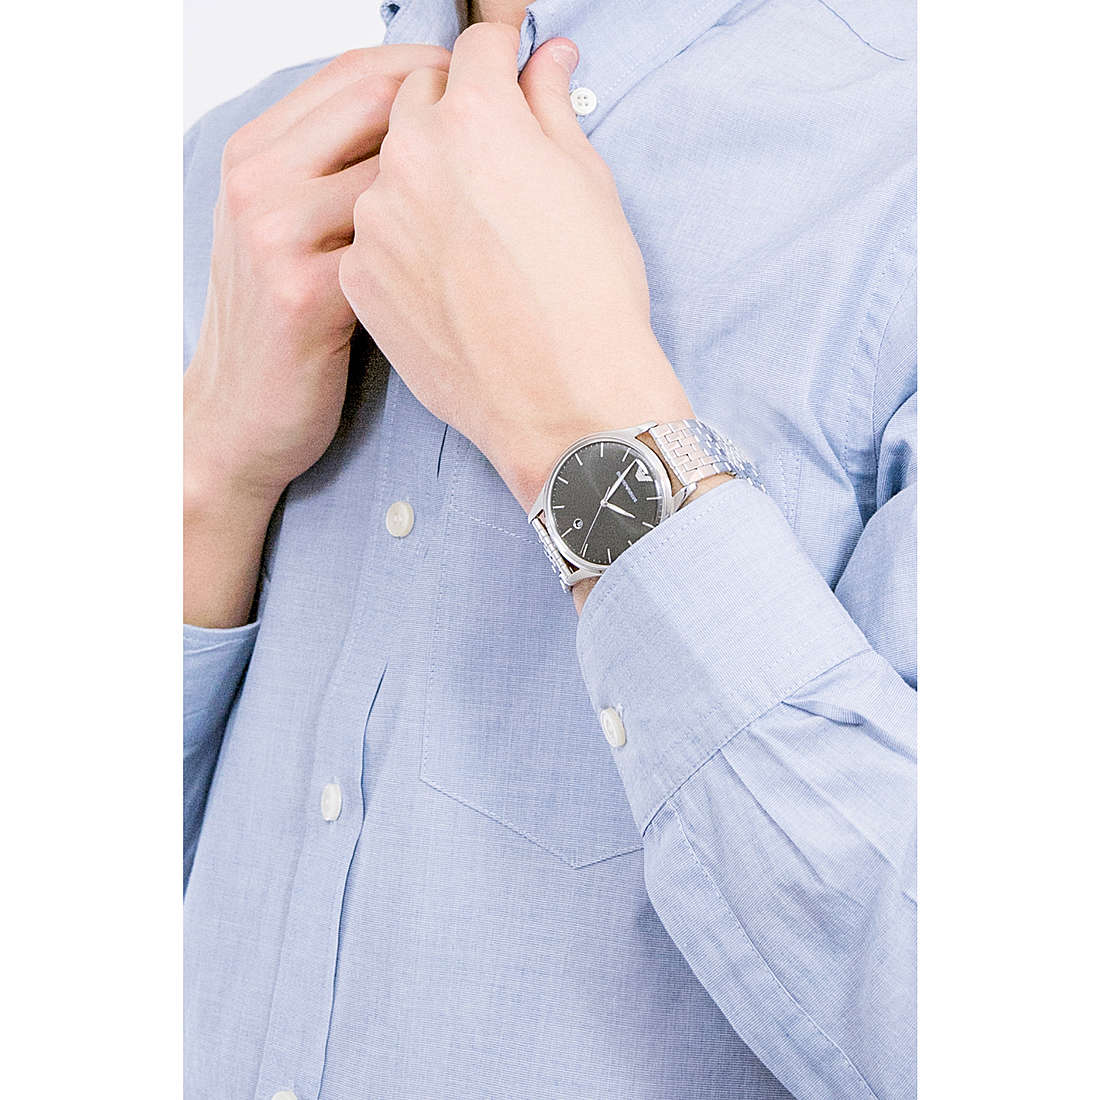 Emporio Armani only time man AR11286 wearing